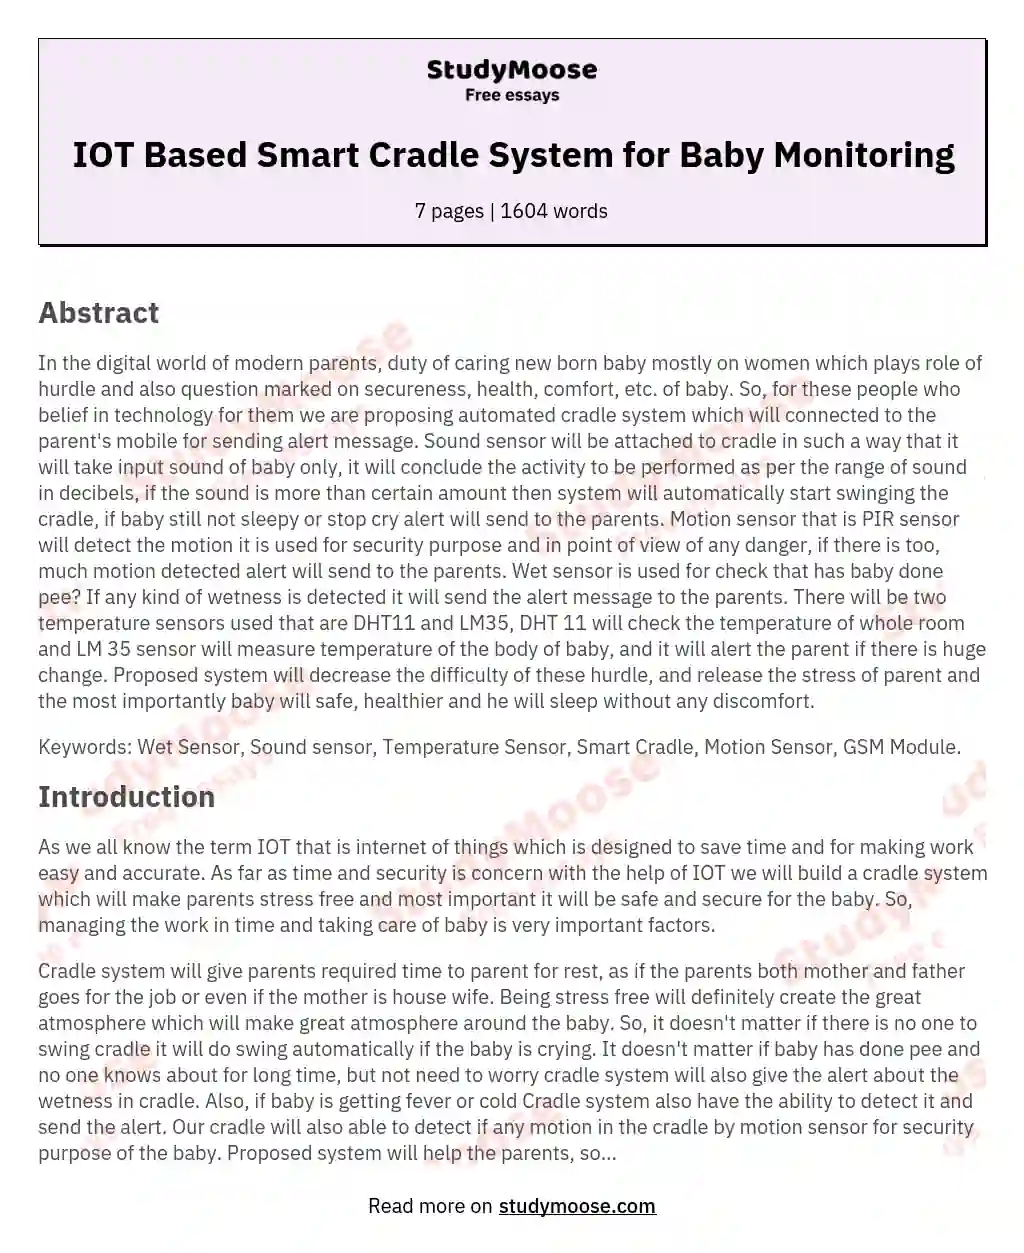 IOT Based Smart Cradle System for Baby Monitoring essay